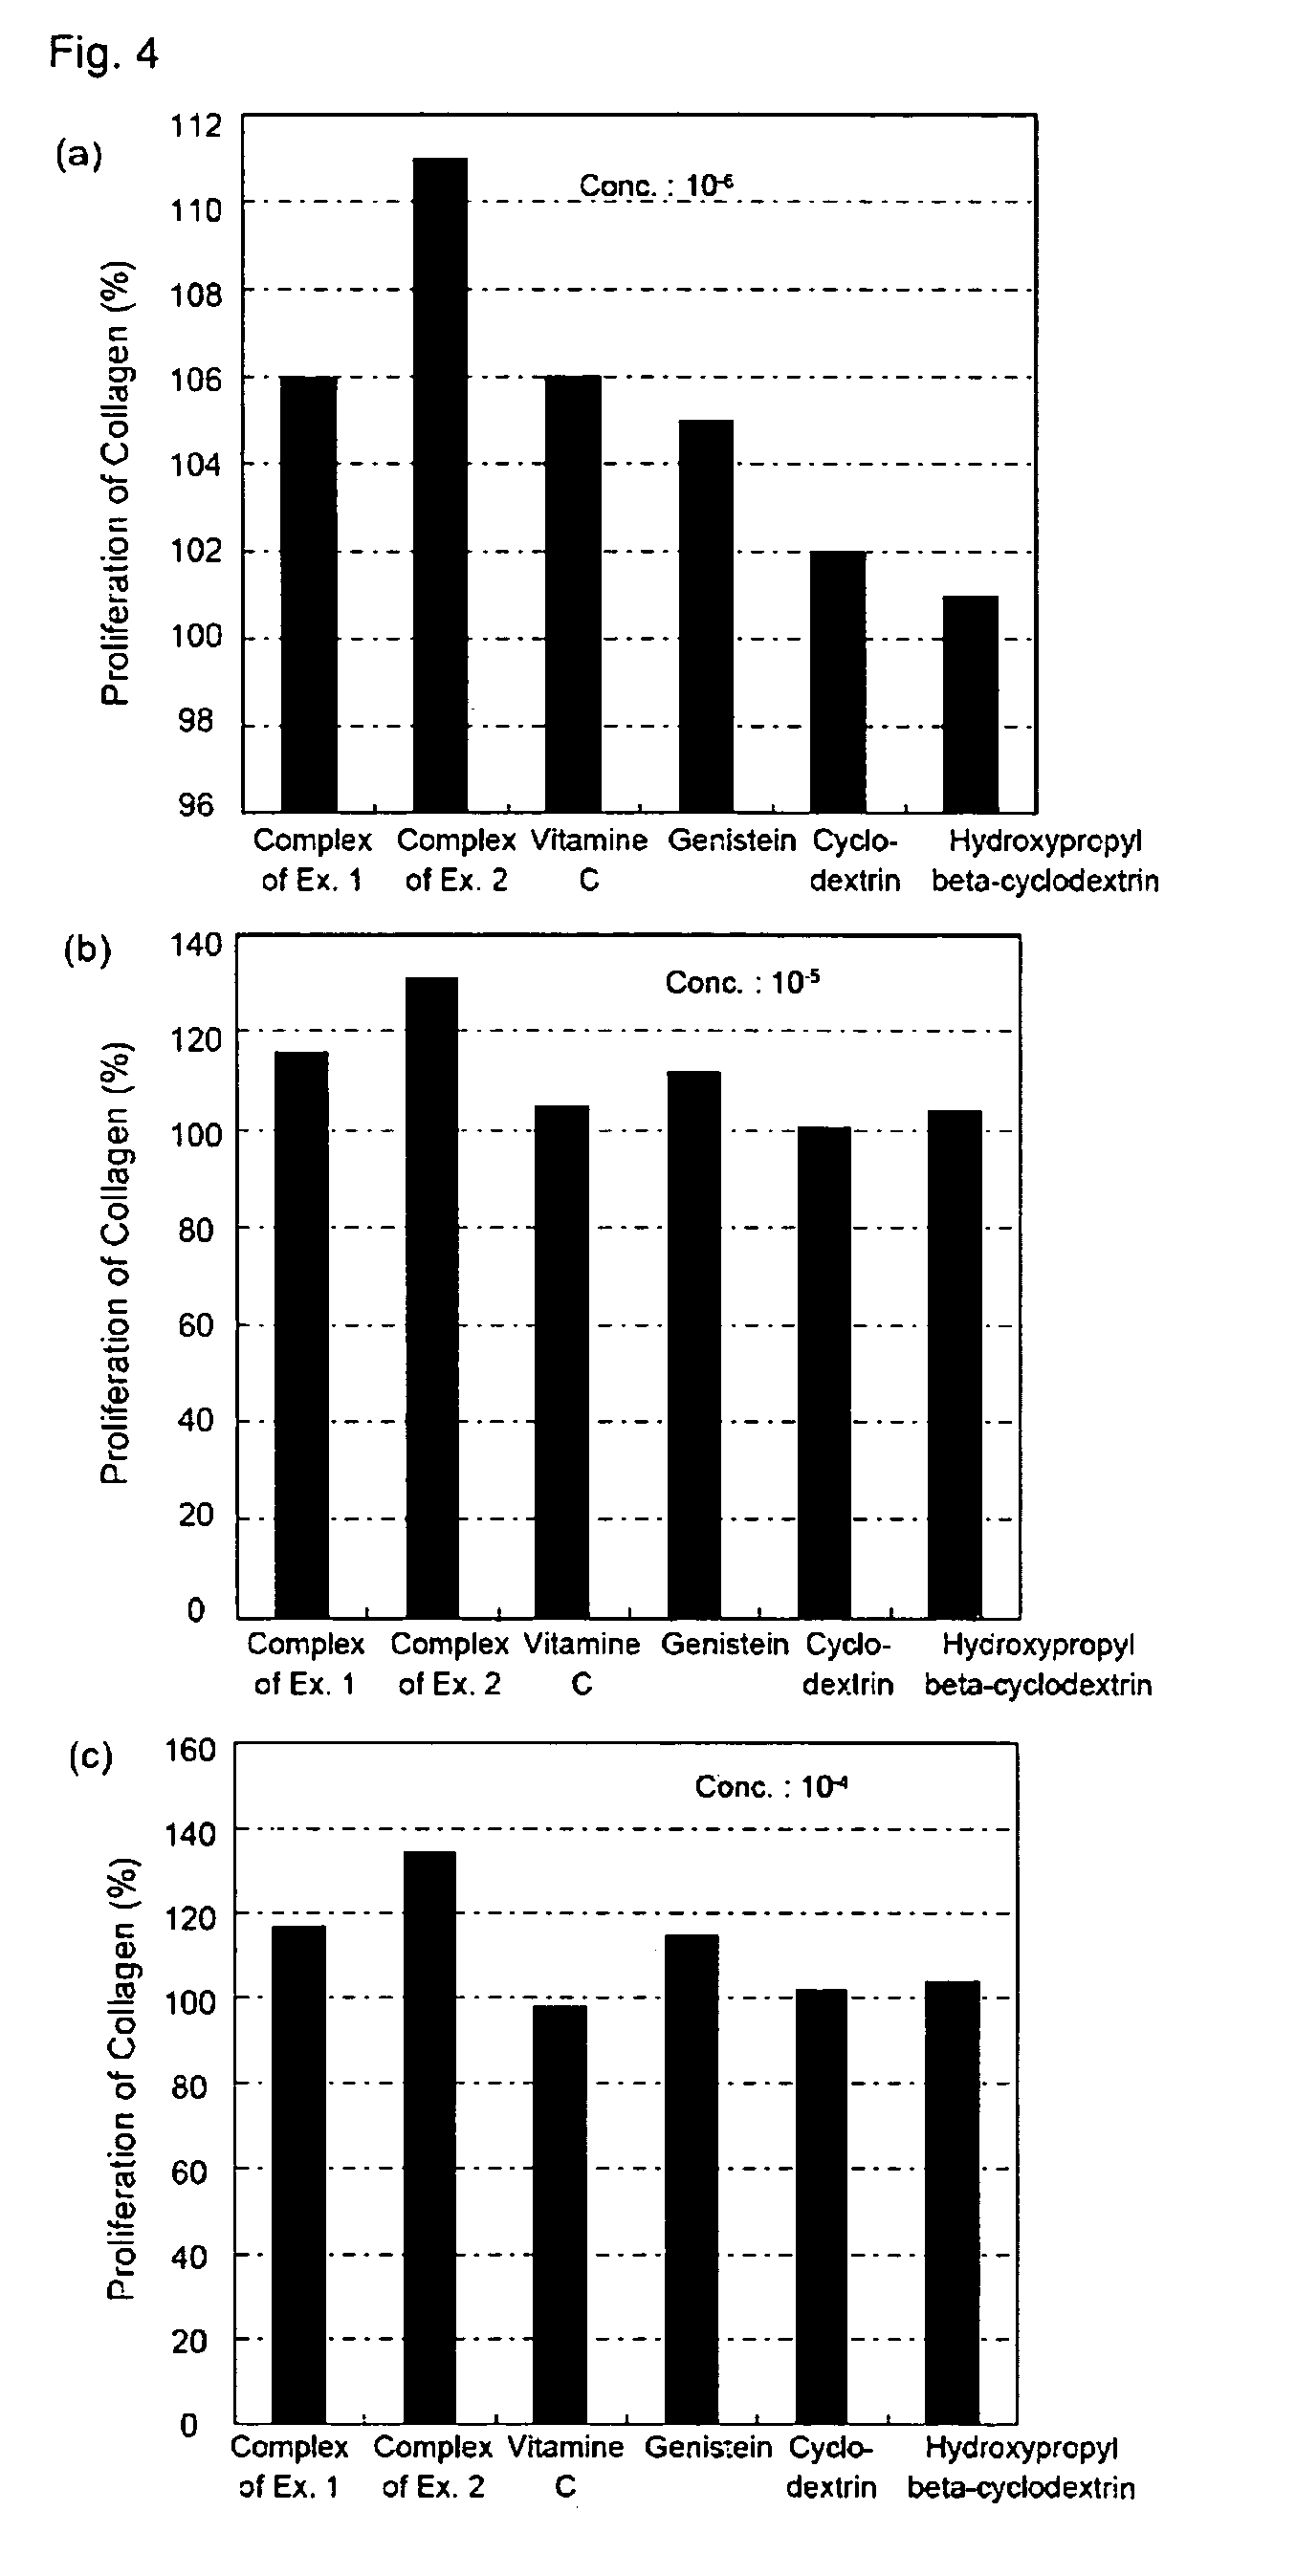 Method of preparation an inclusion-complex comprising hydrophobic physiological activation material including with cyclodextrin and its use